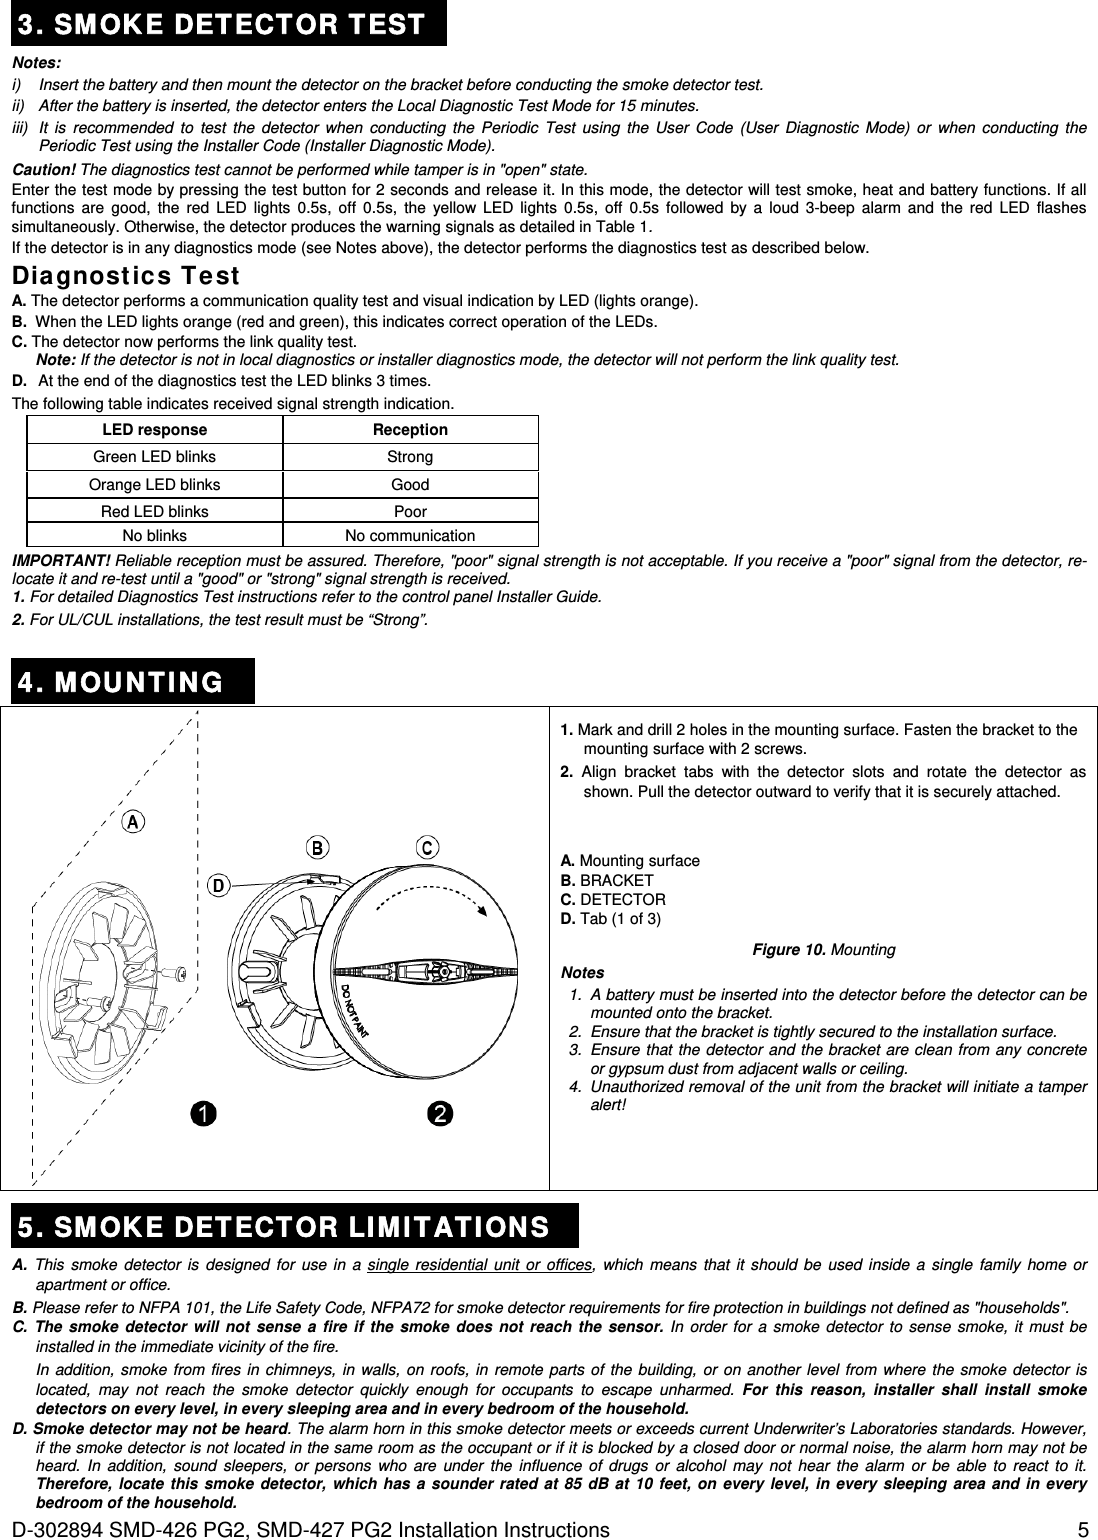  D-302894 SMD-426 PG2, SMD-427 PG2 Installation Instructions  5 3. SMOKE DET ECTOR TEST  Notes: i)  Insert the battery and then mount the detector on the bracket before conducting the smoke detector test.  ii)  After the battery is inserted, the detector enters the Local Diagnostic Test Mode for 15 minutes. iii)  It is recommended to test the detector when conducting the Periodic Test using the User Code (User Diagnostic Mode) or when conducting the Periodic Test using the Installer Code (Installer Diagnostic Mode). Caution! The diagnostics test cannot be performed while tamper is in &quot;open&quot; state. Enter the test mode by pressing the test button for 2 seconds and release it. In this mode, the detector will test smoke, heat and battery functions. If all functions are good, the red LED lights 0.5s, off 0.5s, the yellow LED lights 0.5s, off 0.5s followed by a loud 3-beep alarm and the red LED flashes simultaneously. Otherwise, the detector produces the warning signals as detailed in Table 1. If the detector is in any diagnostics mode (see Notes above), the detector performs the diagnostics test as described below.  Diagnost ics Te st A. The detector performs a communication quality test and visual indication by LED (lights orange). B.  When the LED lights orange (red and green), this indicates correct operation of the LEDs. C. The detector now performs the link quality test. Note: If the detector is not in local diagnostics or installer diagnostics mode, the detector will not perform the link quality test. D.  At the end of the diagnostics test the LED blinks 3 times.  The following table indicates received signal strength indication. LED response Reception  Green LED blinks Strong  Orange LED blinks Good  Red LED blinks Poor  No blinks No communication IMPORTANT! Reliable reception must be assured. Therefore, &quot;poor&quot; signal strength is not acceptable. If you receive a &quot;poor&quot; signal from the detector, re-locate it and re-test until a &quot;good&quot; or &quot;strong&quot; signal strength is received. 1. For detailed Diagnostics Test instructions refer to the control panel Installer Guide. 2. For UL/CUL installations, the test result must be “Strong”.  4. MOUNTING  1. Mark and drill 2 holes in the mounting surface. Fasten the bracket to the mounting surface with 2 screws. 2. Align bracket tabs with the detector slots and rotate the detector as shown. Pull the detector outward to verify that it is securely attached. A. Mounting surface B. BRACKET C. DETECTOR D. Tab (1 of 3) Figure 10. Mounting Notes 1.  A battery must be inserted into the detector before the detector can be mounted onto the bracket. 2.  Ensure that the bracket is tightly secured to the installation surface. 3.  Ensure that the detector and the bracket are clean from any concrete or gypsum dust from adjacent walls or ceiling. 4.  Unauthorized removal of the unit from the bracket will initiate a tamper alert!  5. SMOKE DET ECTOR LI MI TATI ON S A. This smoke detector is designed for use in a single residential unit or offices, which means that it should be used inside a single family home or apartment or office. B. Please refer to NFPA 101, the Life Safety Code, NFPA72 for smoke detector requirements for fire protection in buildings not defined as &quot;households&quot;. C. The smoke detector will not sense a fire if the smoke does not reach the sensor. In order for a smoke detector to sense smoke, it must be installed in the immediate vicinity of the fire.  In addition, smoke from fires in chimneys, in walls, on roofs, in remote parts of the building, or on another level from where the smoke detector is located, may not reach the smoke detector quickly enough for occupants to escape unharmed. For this reason, installer shall install smoke detectors on every level, in every sleeping area and in every bedroom of the household. D. Smoke detector may not be heard. The alarm horn in this smoke detector meets or exceeds current Underwriter’s Laboratories standards. However, if the smoke detector is not located in the same room as the occupant or if it is blocked by a closed door or normal noise, the alarm horn may not be heard. In addition, sound sleepers, or persons who are under the influence of drugs or alcohol may not hear the alarm or be able to react to it. Therefore, locate this smoke detector, which has a sounder rated at 85 dB at 10 feet, on every level, in every sleeping area and in every bedroom of the household. 